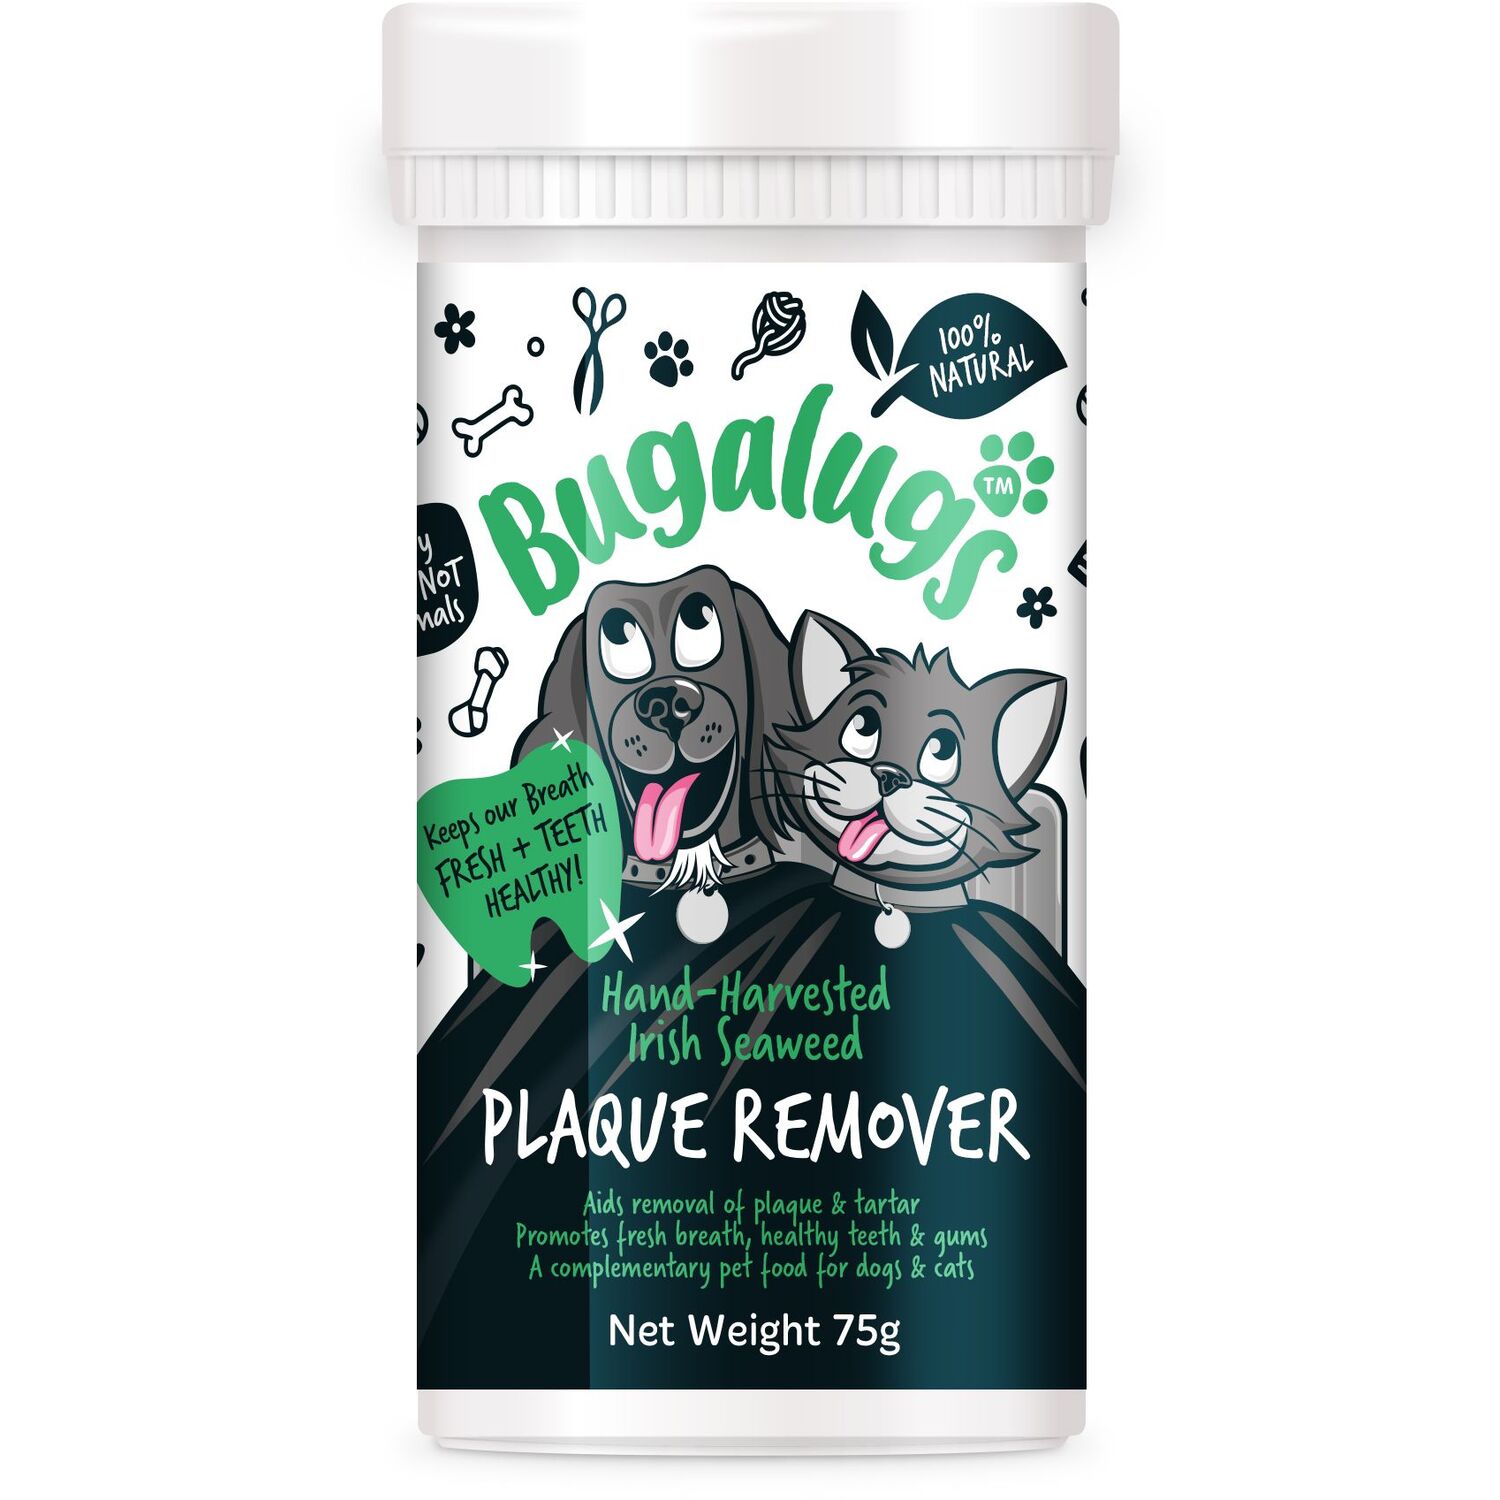 Bugalugs Plaque Remover Image